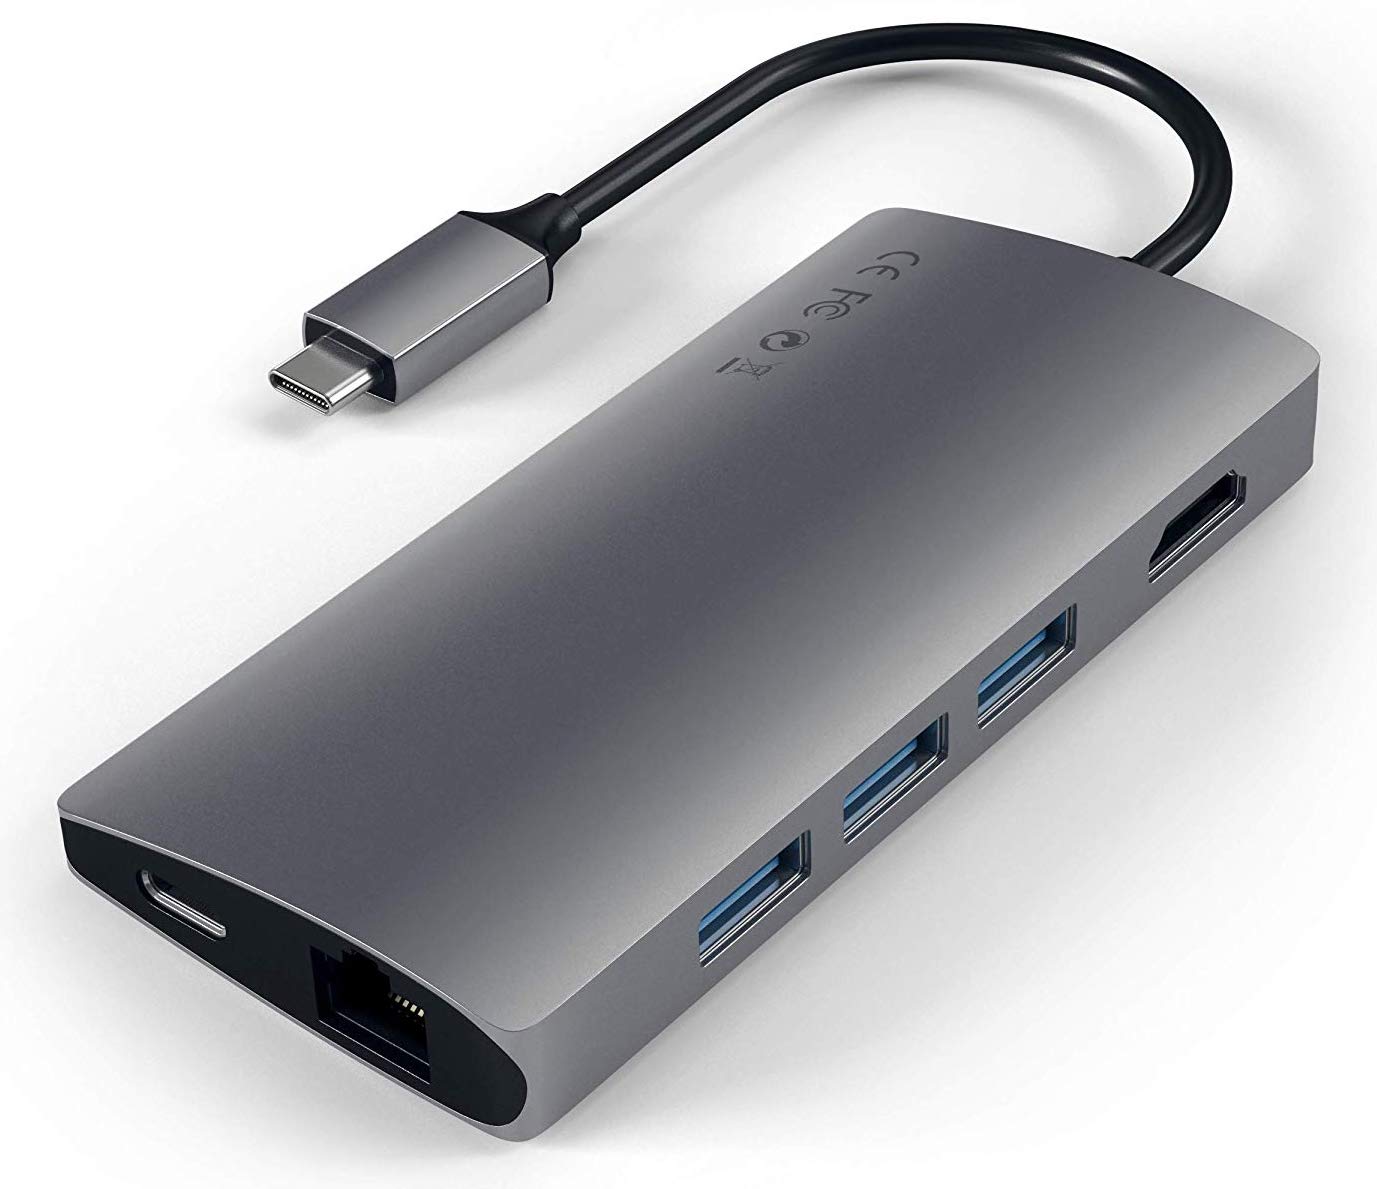 ethernet to usb for transferring photos from macbook pro to mac pro?